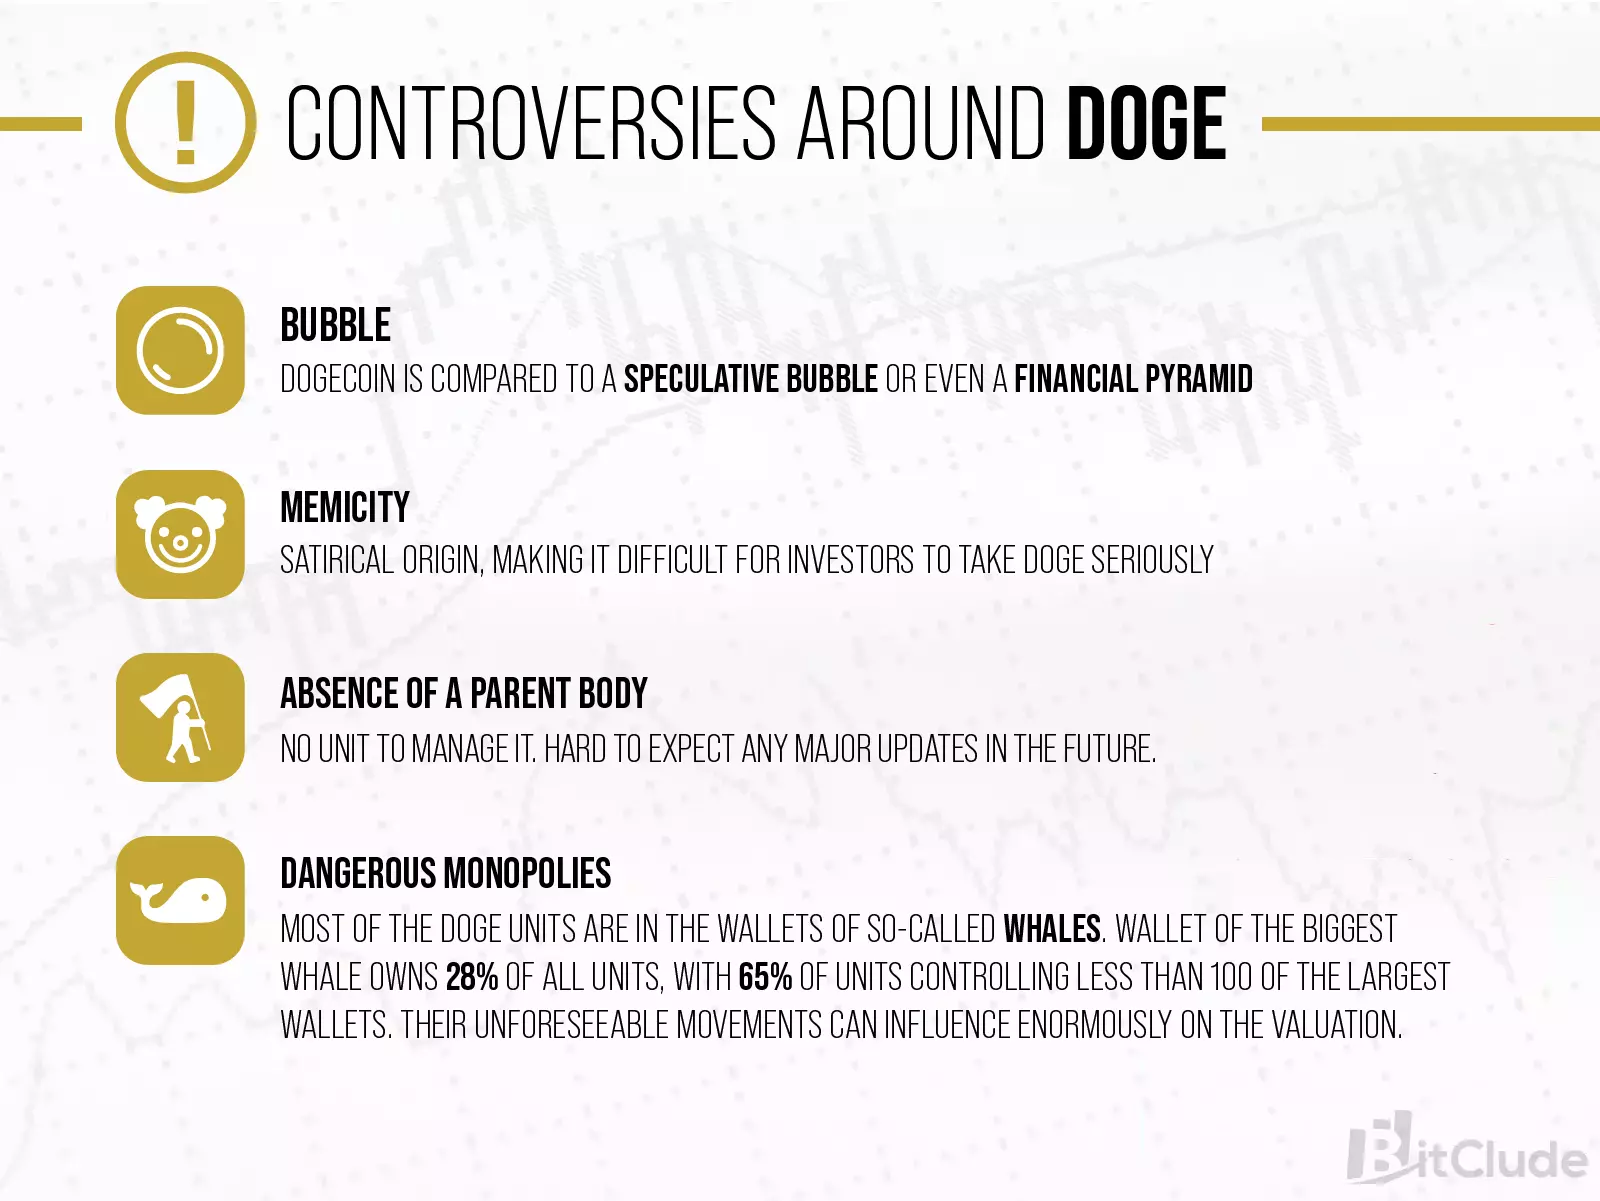 Controversy around DOGE is caused by the possibility of exchange rate manipulation by the biggest holders of the cryptocurrency.